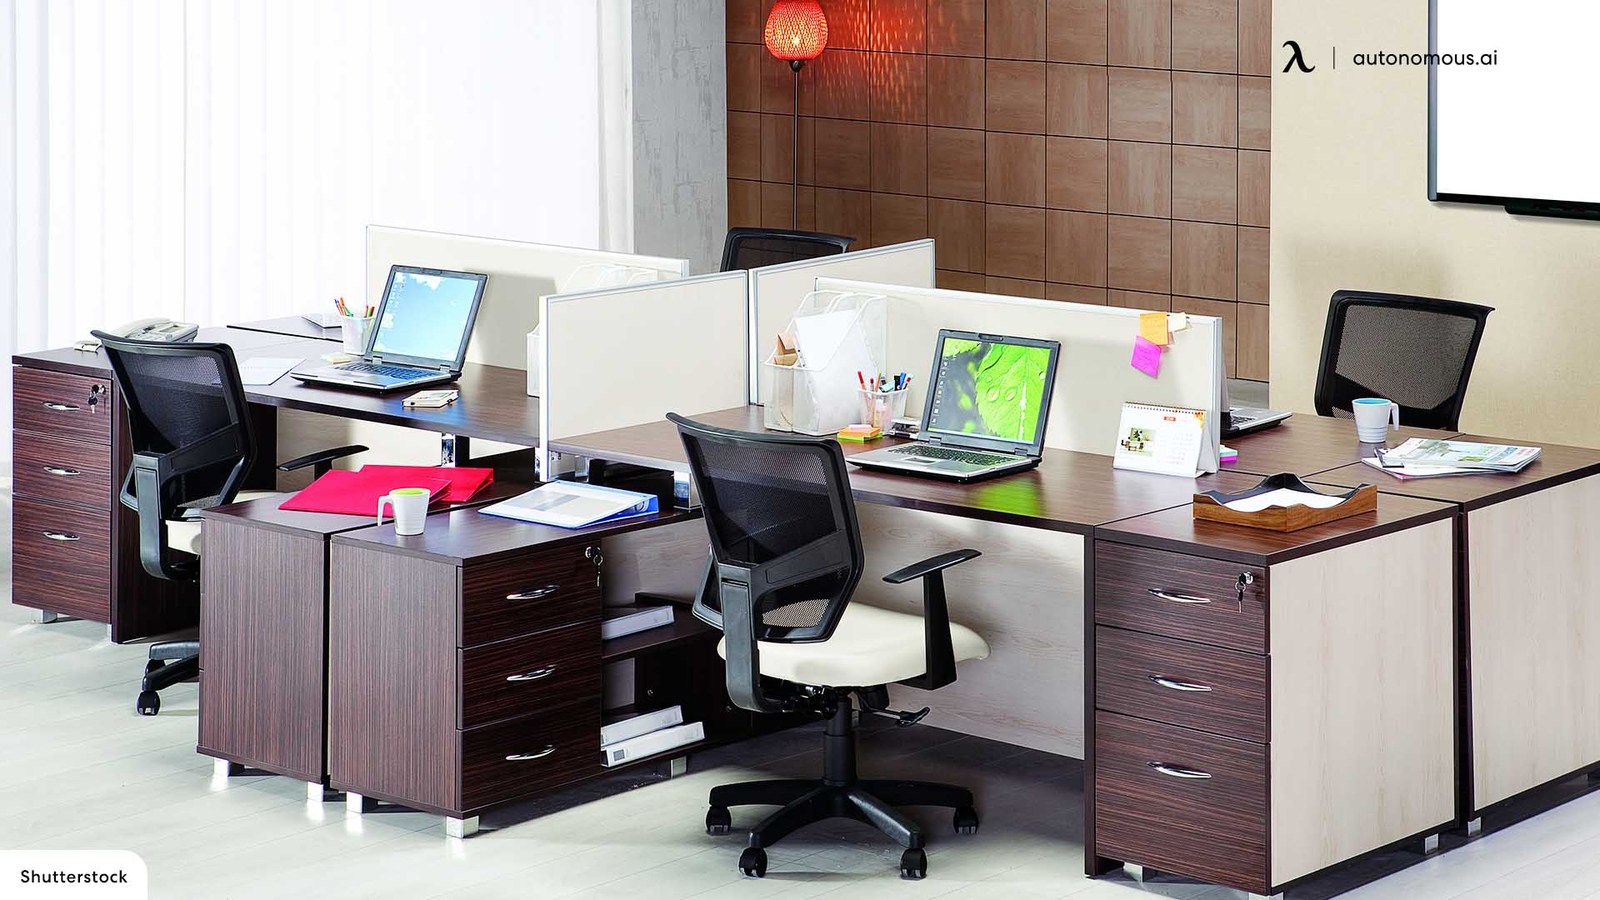 Should You Buy New Or Used Office Furniture?